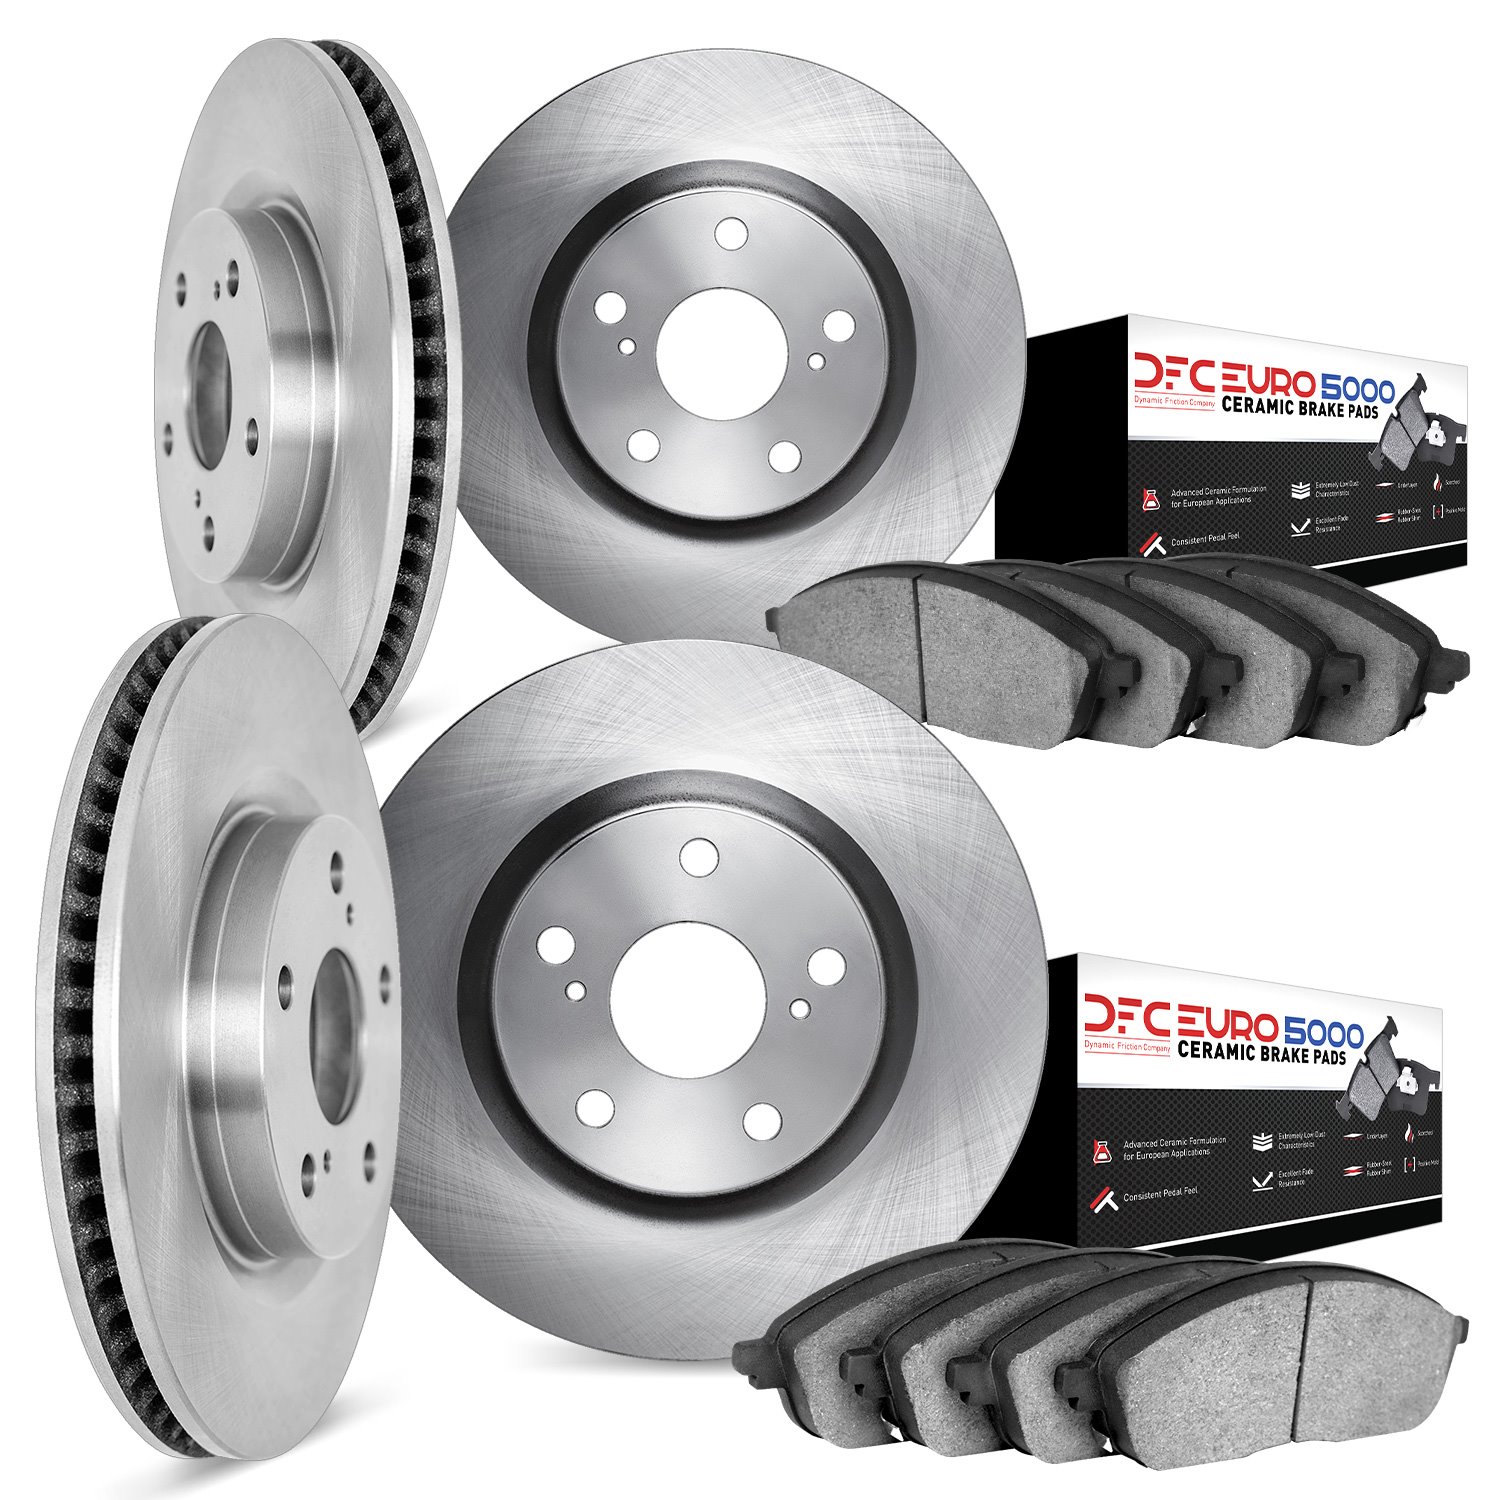 6604-63014 Brake Rotors w/5000 Euro Ceramic Brake Pads, 1992-1999 Mercedes-Benz, Position: Front and Rear